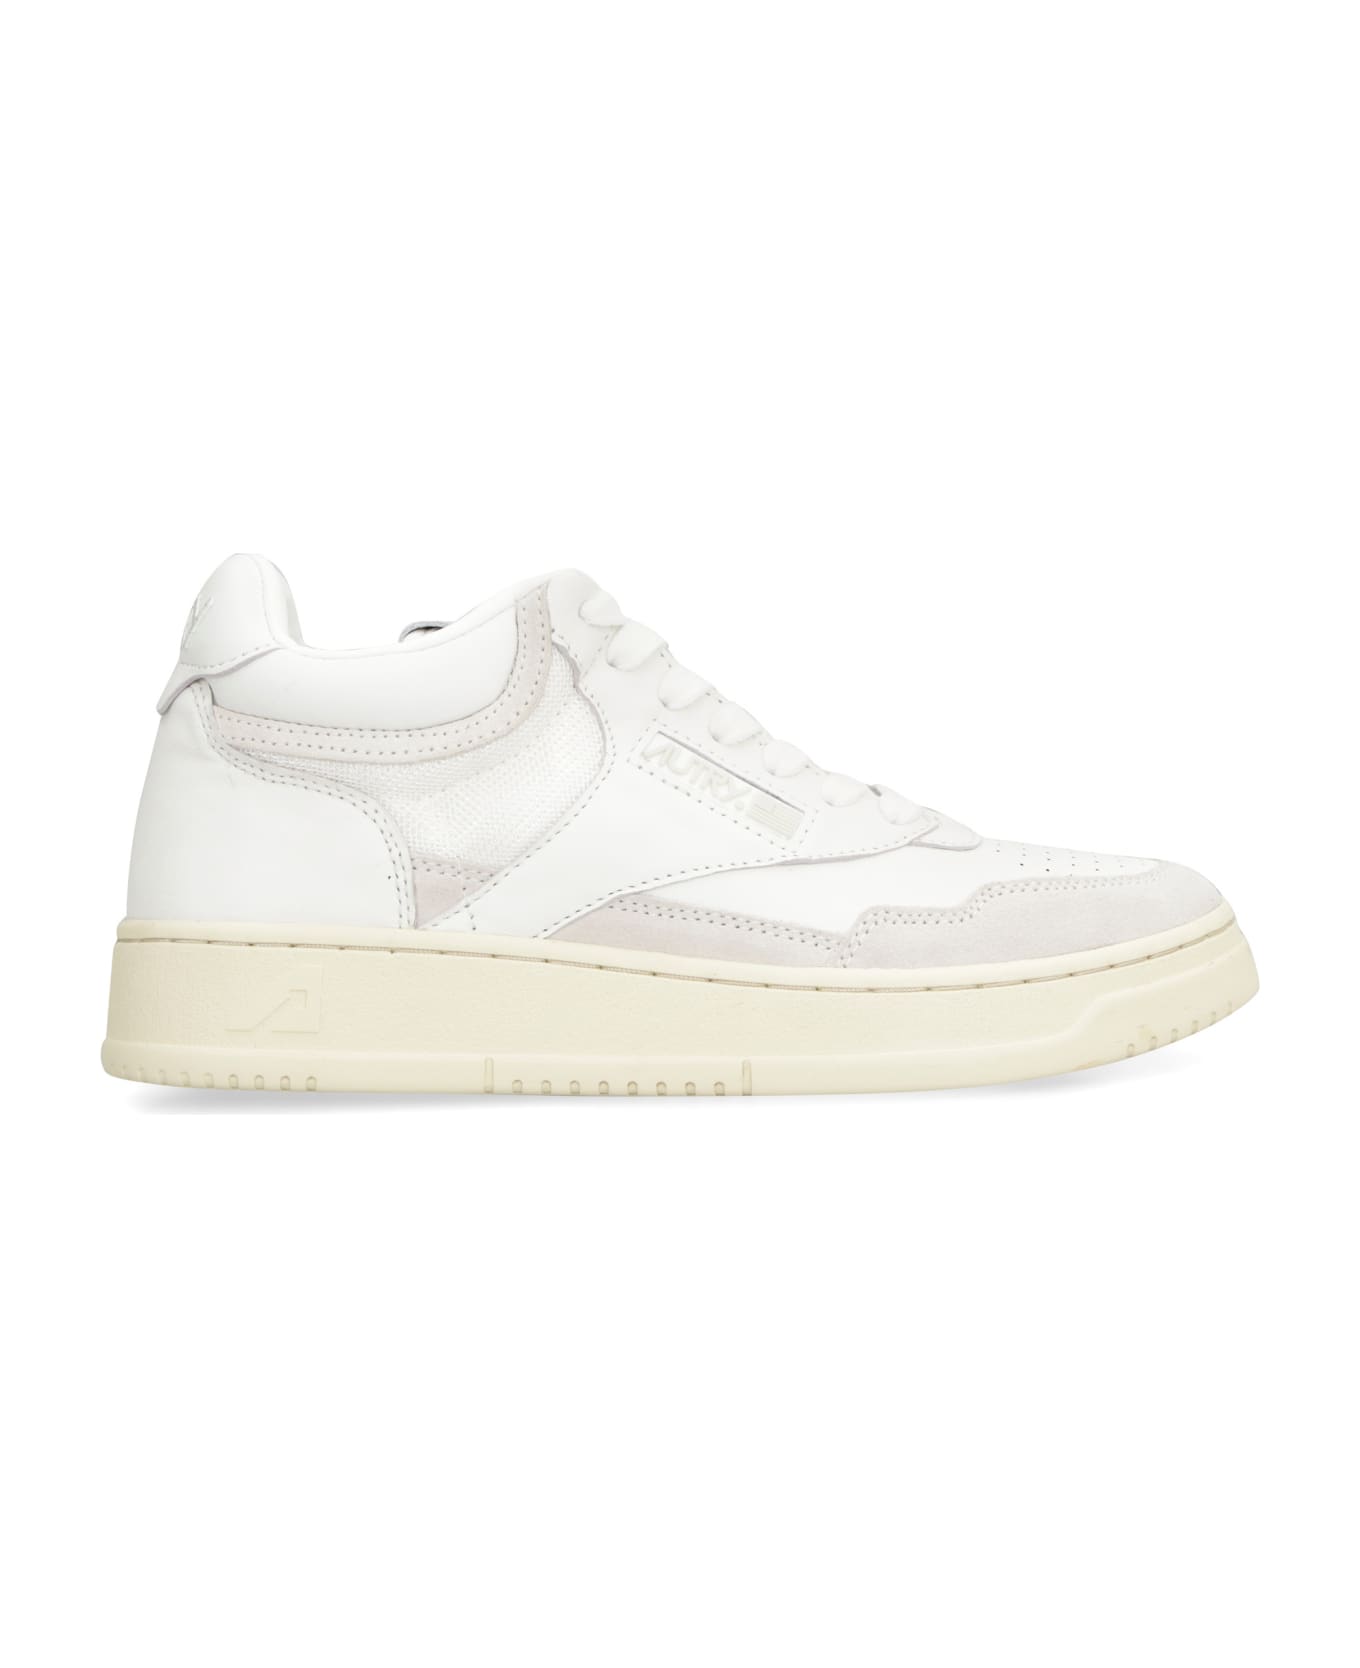 Autry Open Sneakers Mid-top Sneakers - White